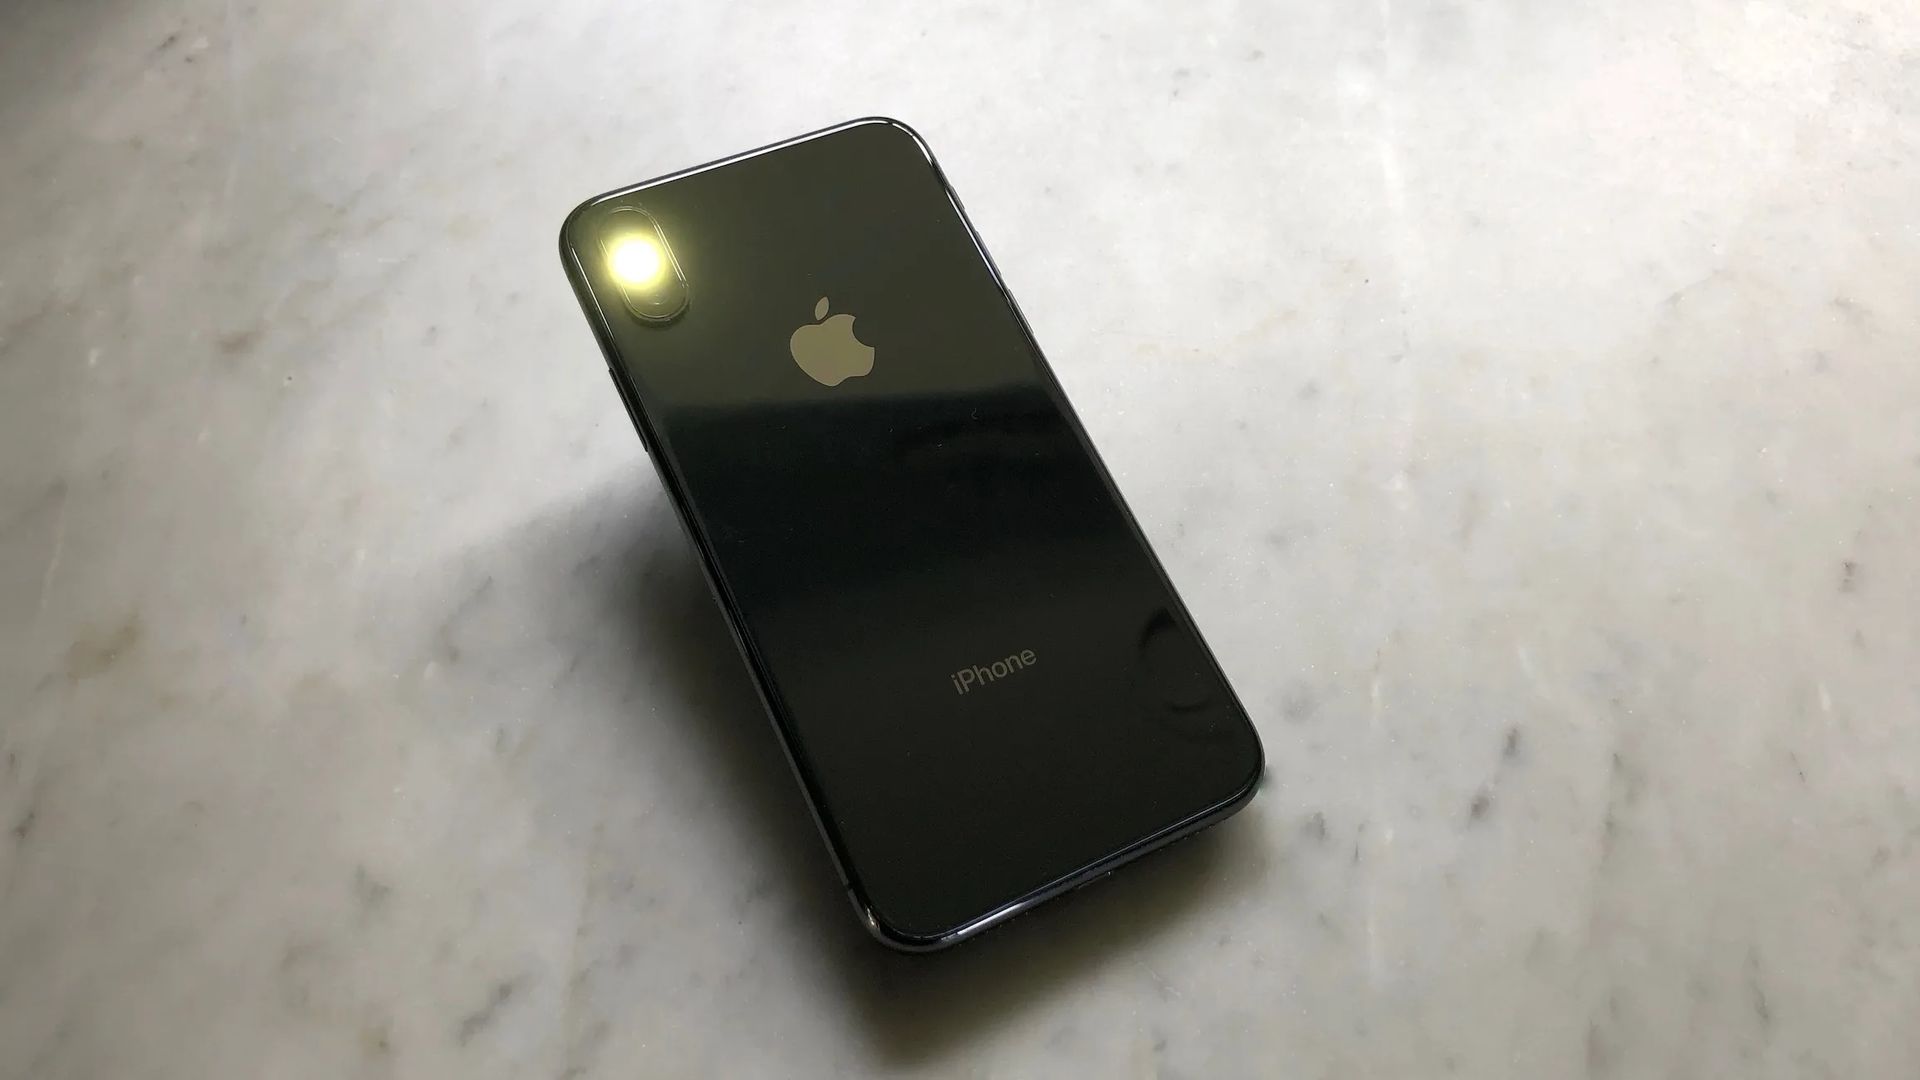 iPhone torch not working: How to fix it?